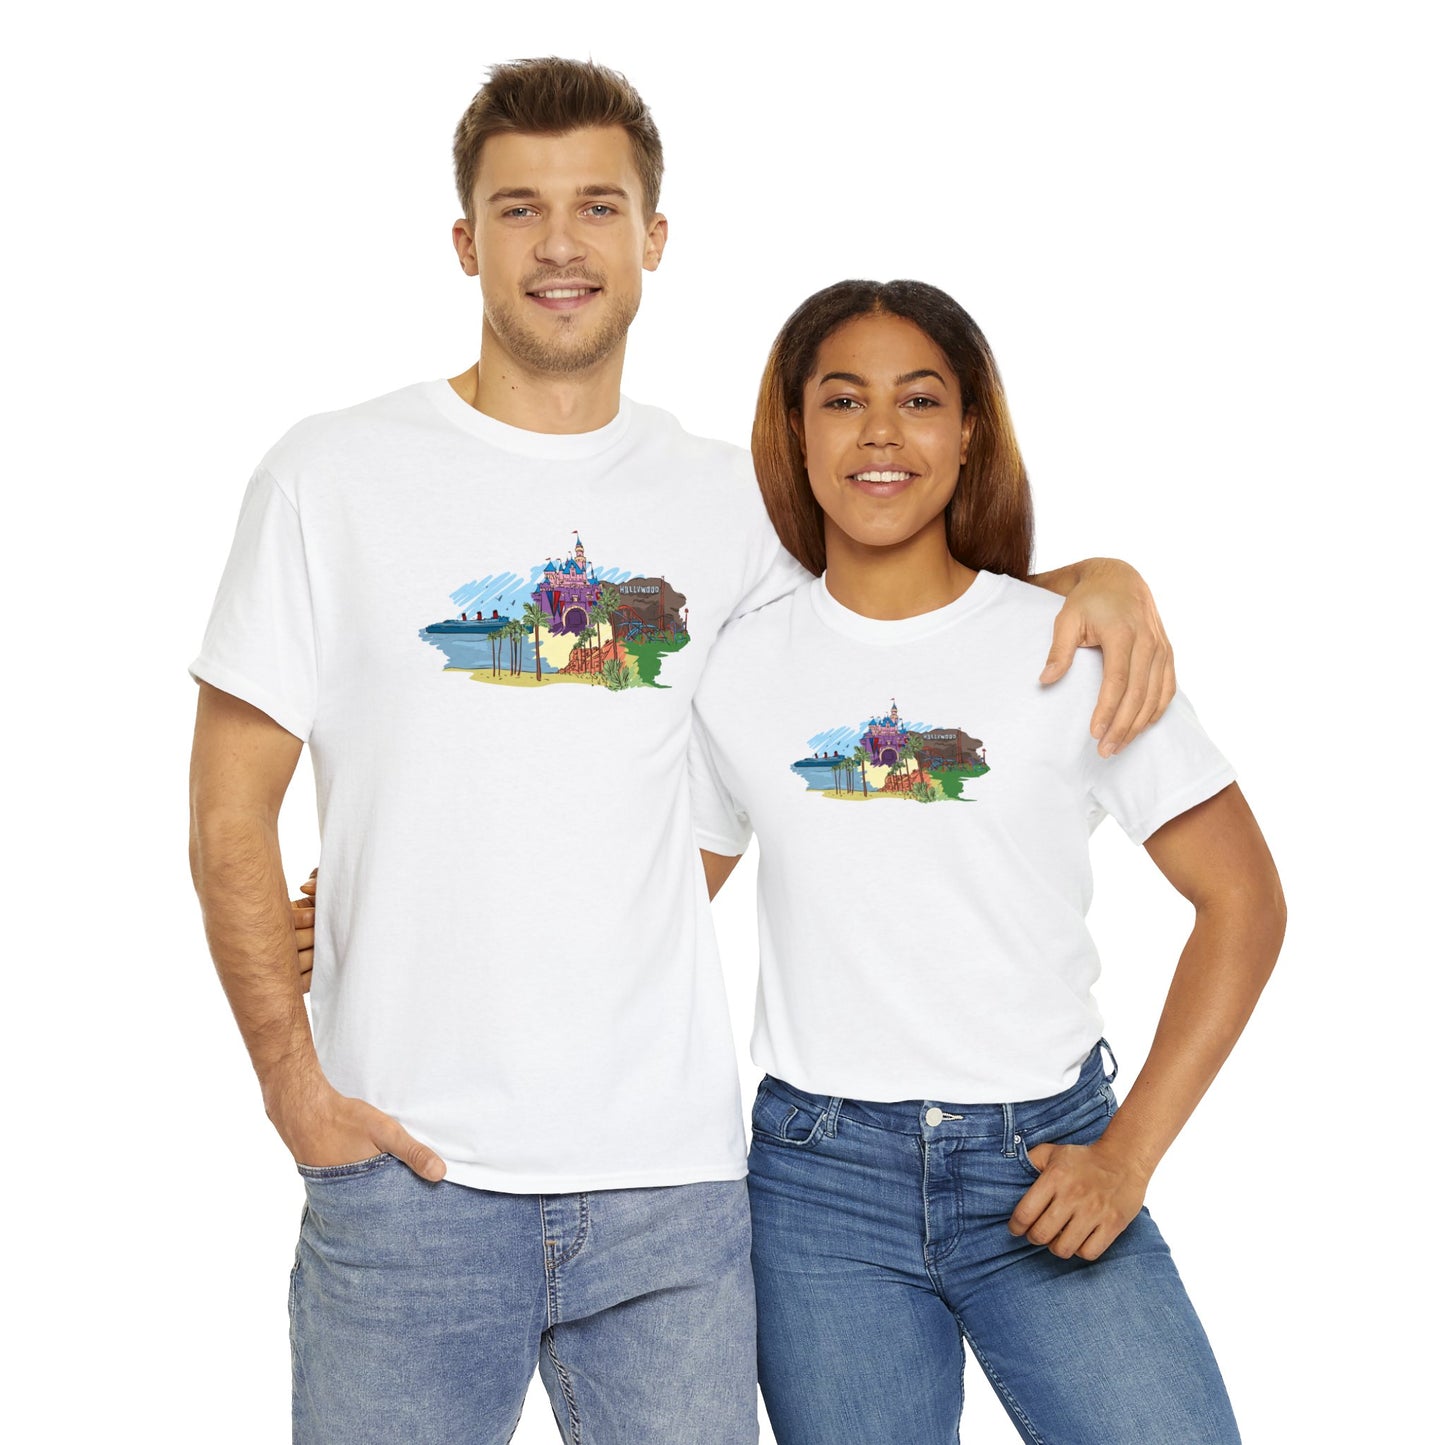 Hollywood Vibes Unleashed: Explore Style and Comfort with Our Exclusive T-shirt!